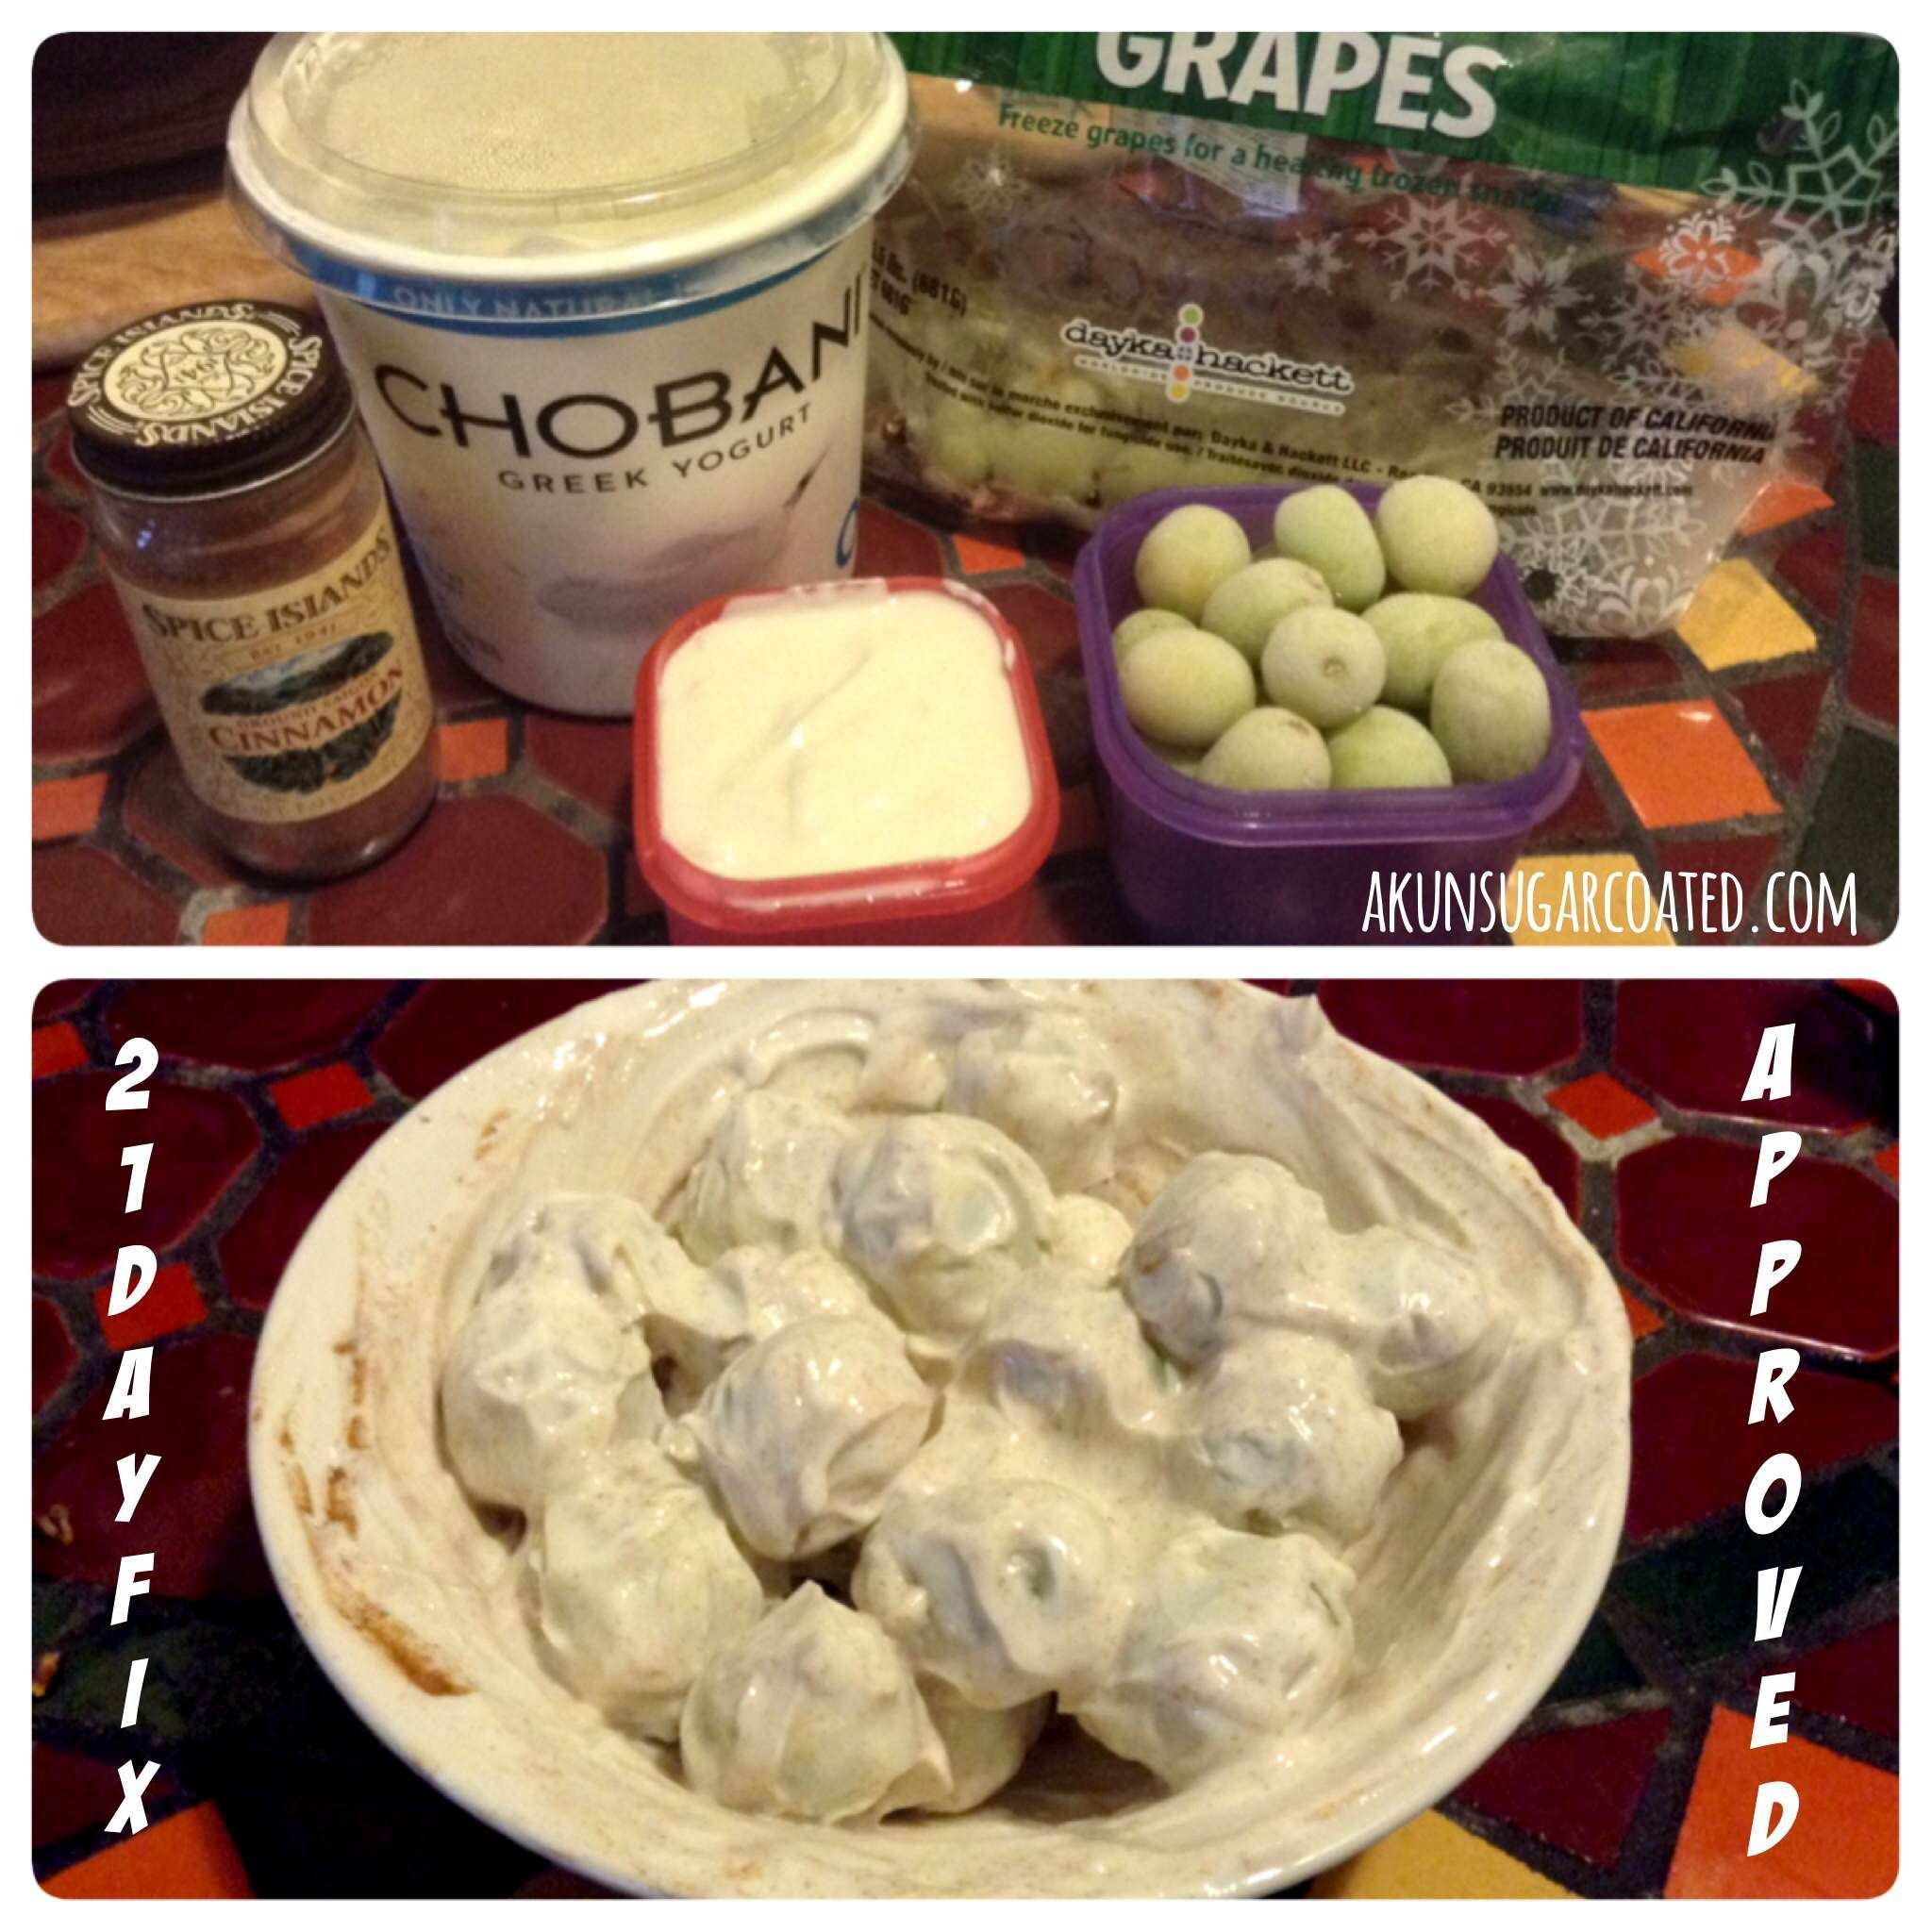 This is my favorite go-to afternoon 21 Day Fix approved snack! #21dayfix #21dayfixapproved 21 Day Fix